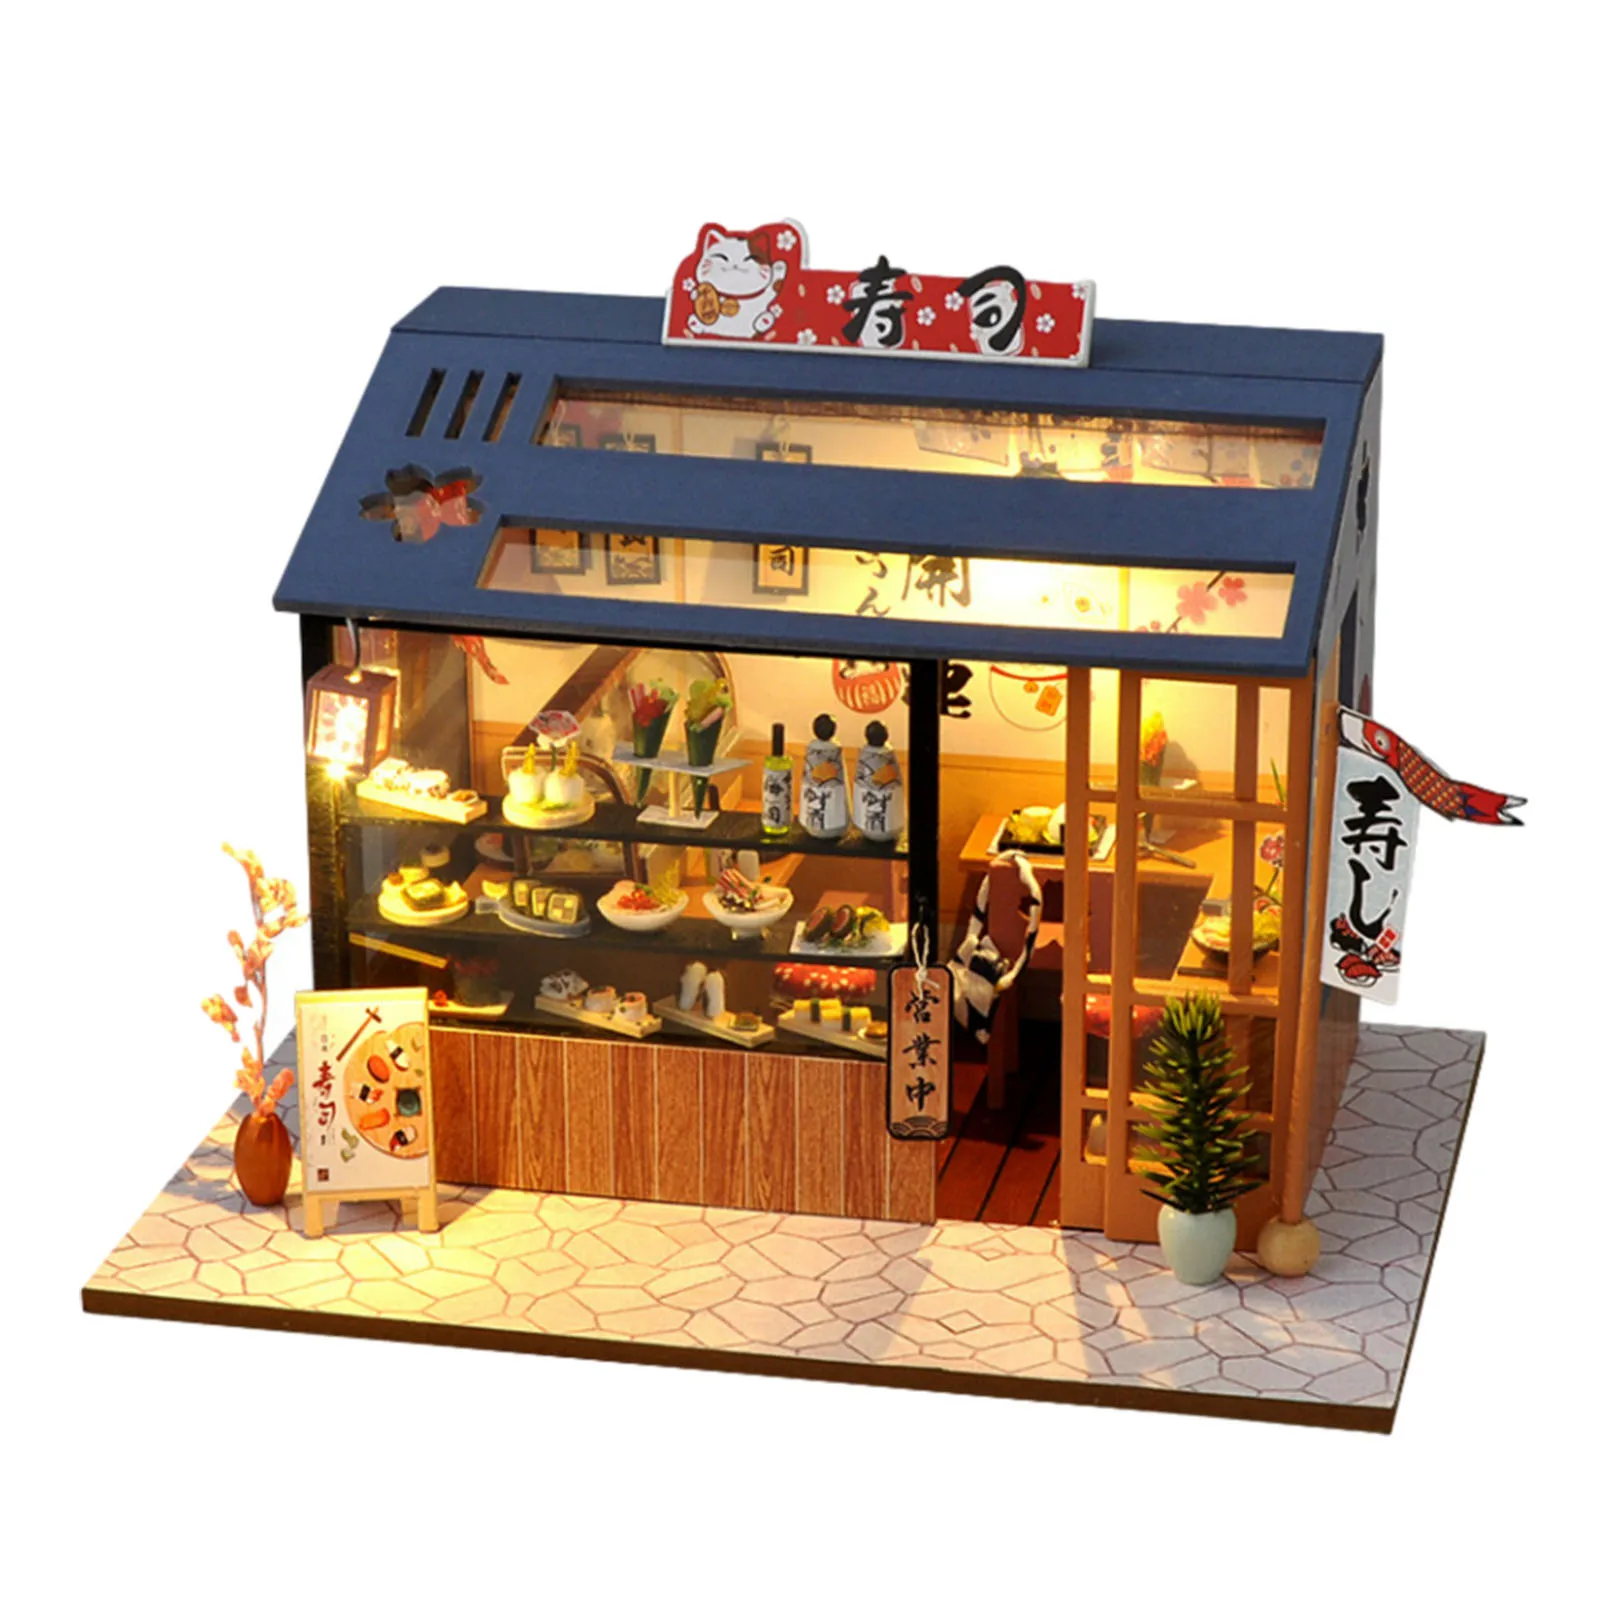 Japanese Doll House Miniature DIY Dollhouse Simulation Sushi Shop Model Toy Wooden Furnitures Children Toy Dollhouse Accessories 1 28 benzs g63 6 6 wheel alloy pickup car model diecast toy off road vehicles car model simulation children gift collective